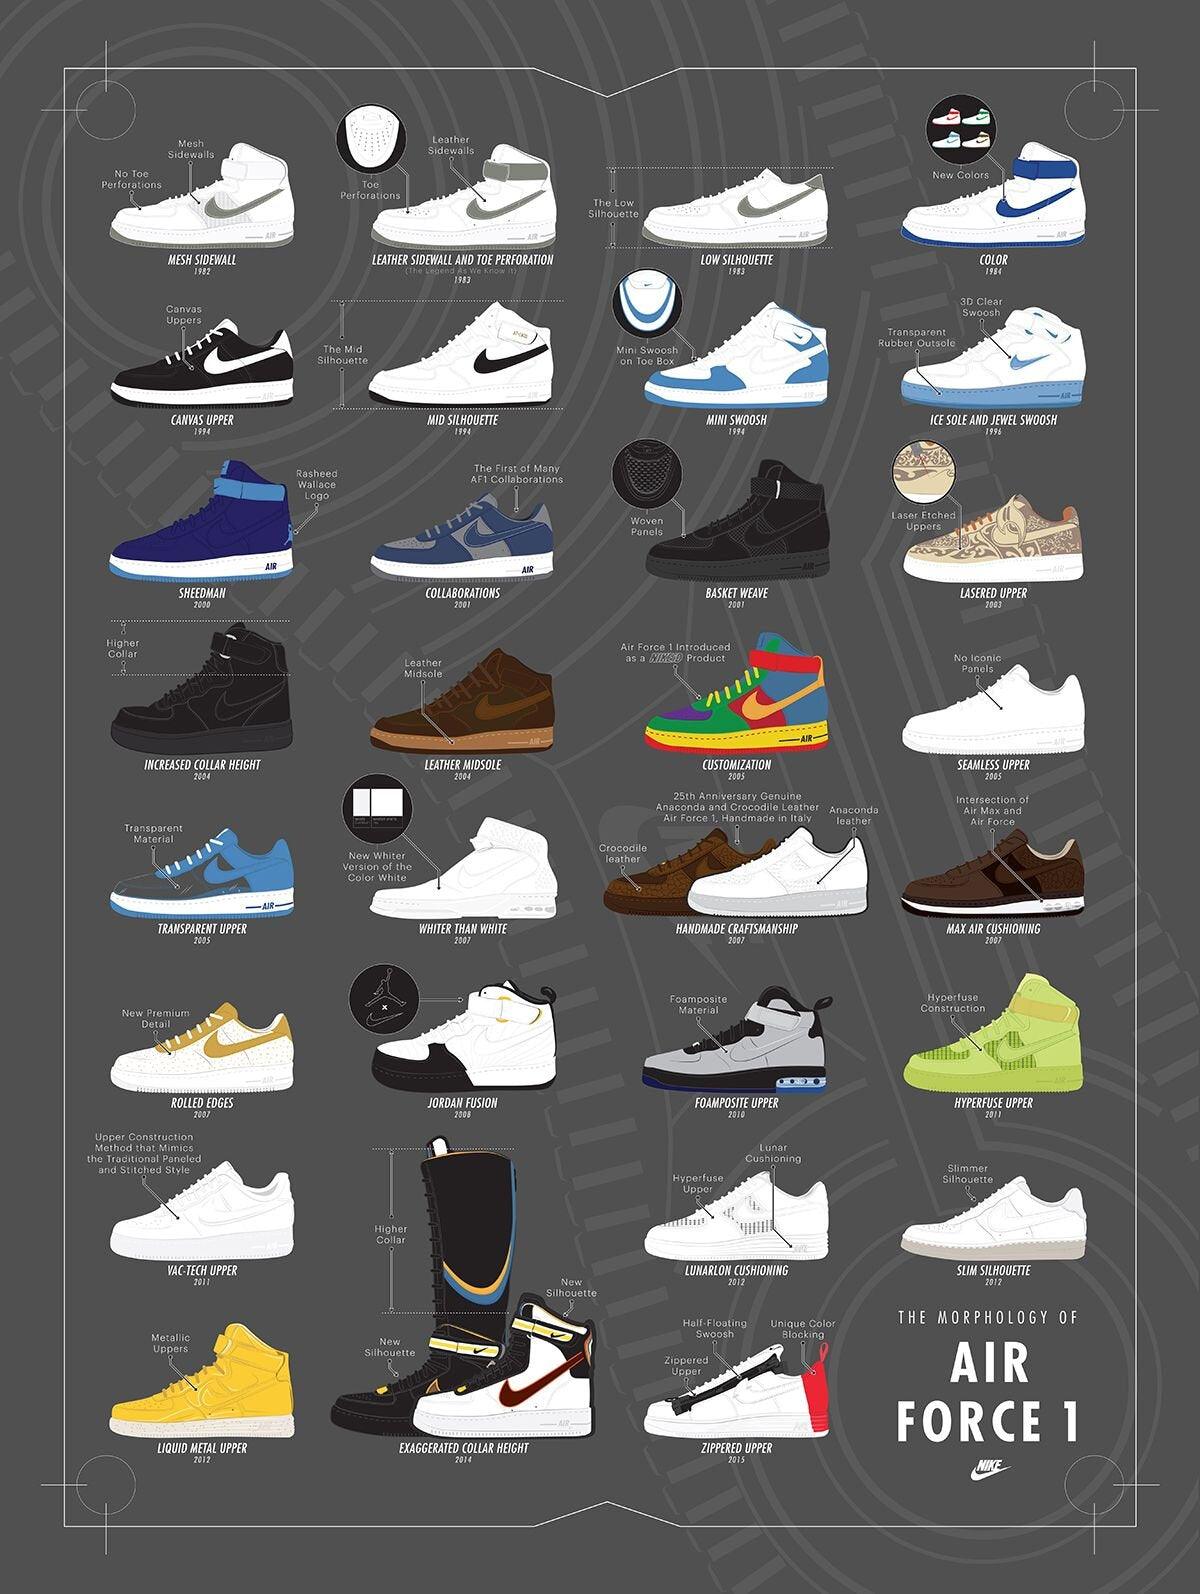 The Obeezi Nike Air Force 1 - All versions of the trend sneaker at a glance - Obeezi.com